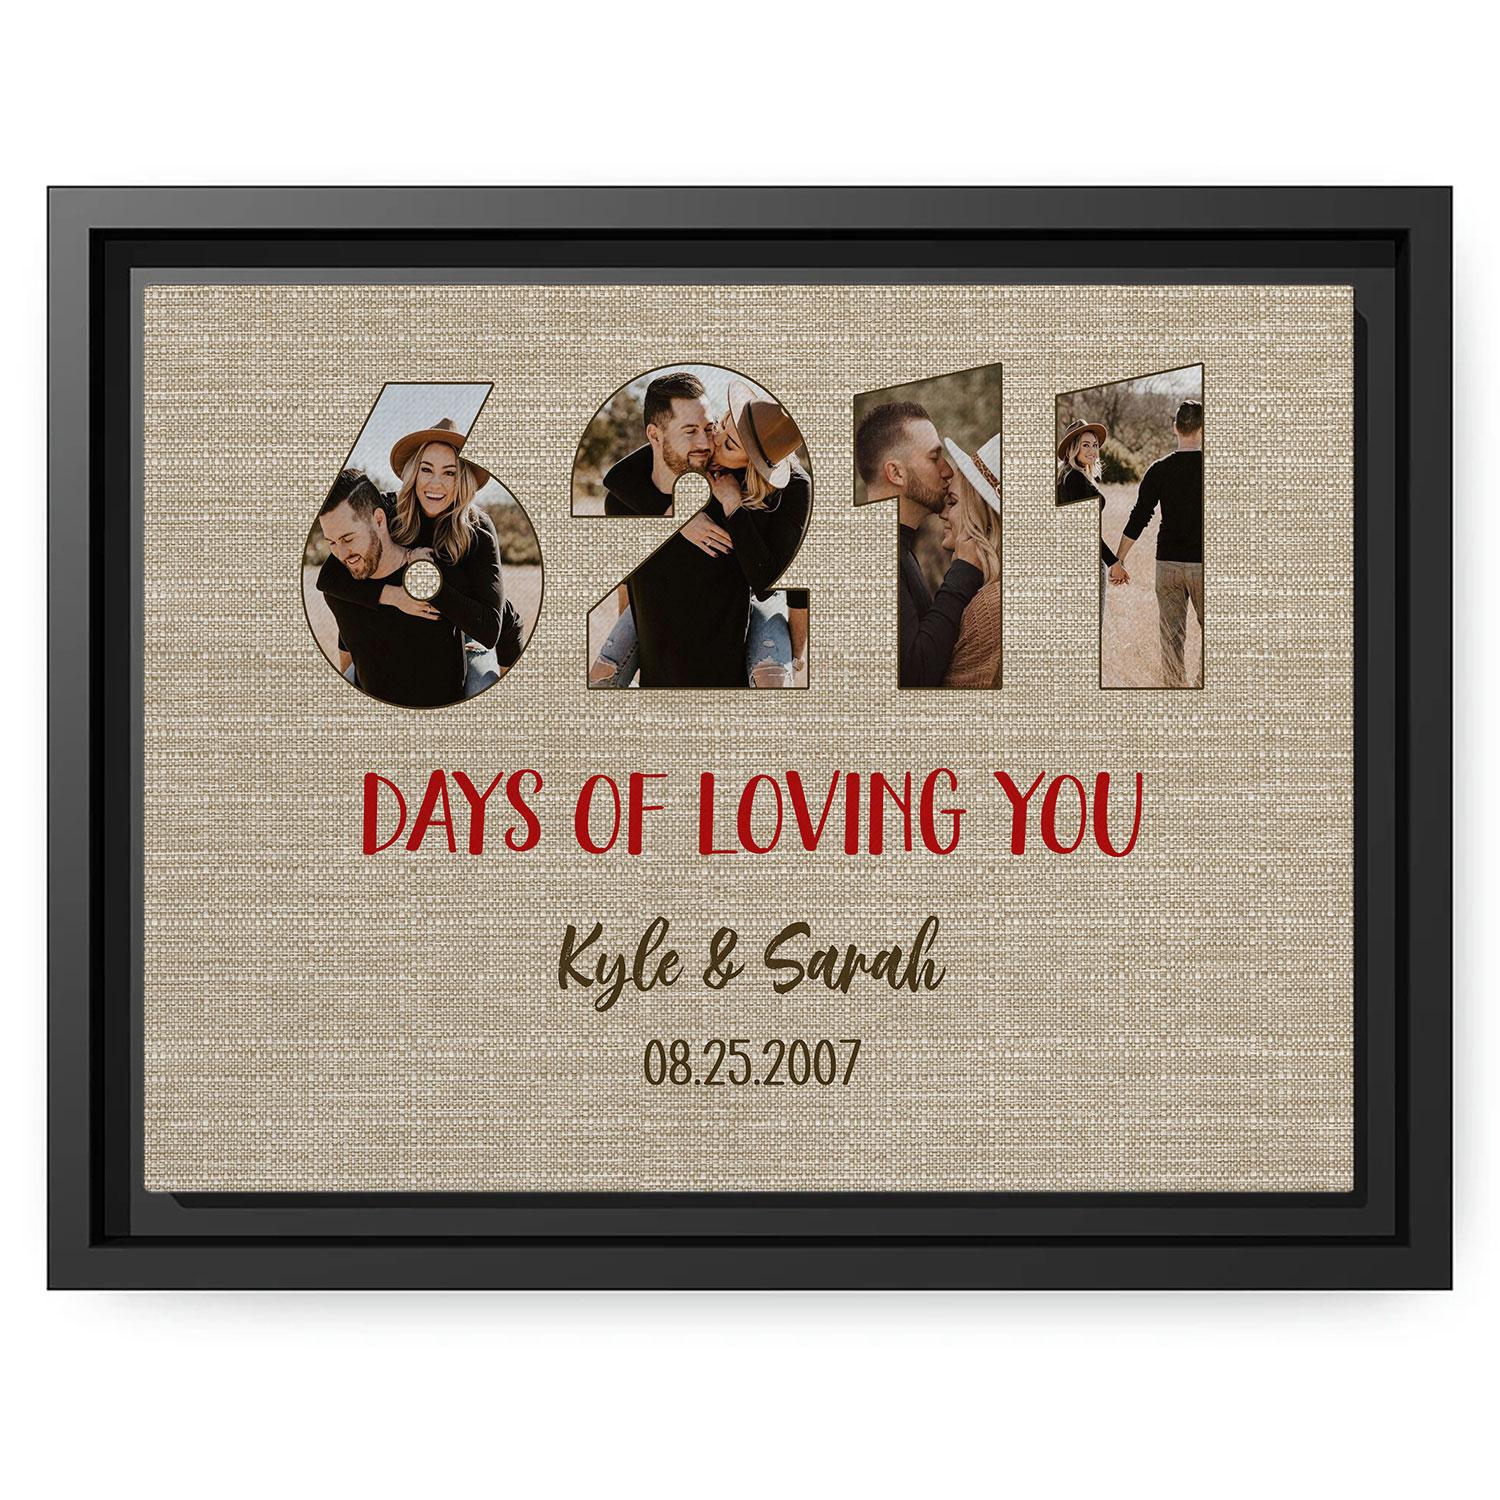 6211 Days Of Loving You - Personalized 17 Year Anniversary gift For Husband or Wife - Custom Canvas Print - MyMindfulGifts